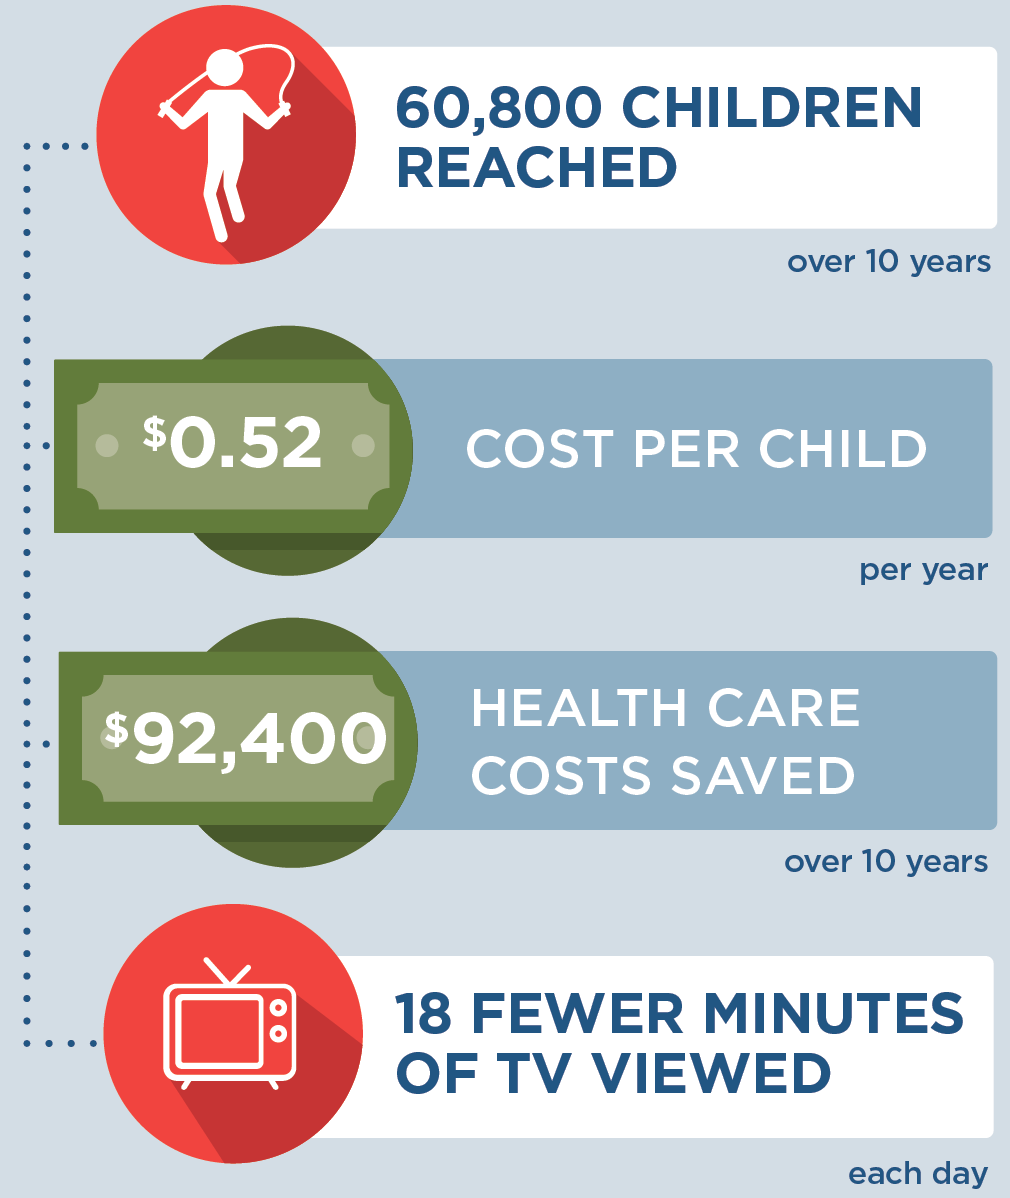 If WIC television time reduction was implemented in Arkansas, then 60,800 children would be reached over 10 years. It would cost $0.52 per child per year to implement, and save $92,400 in health care costs over 10 years. Children would view 18 fewer minutes of TV each day.